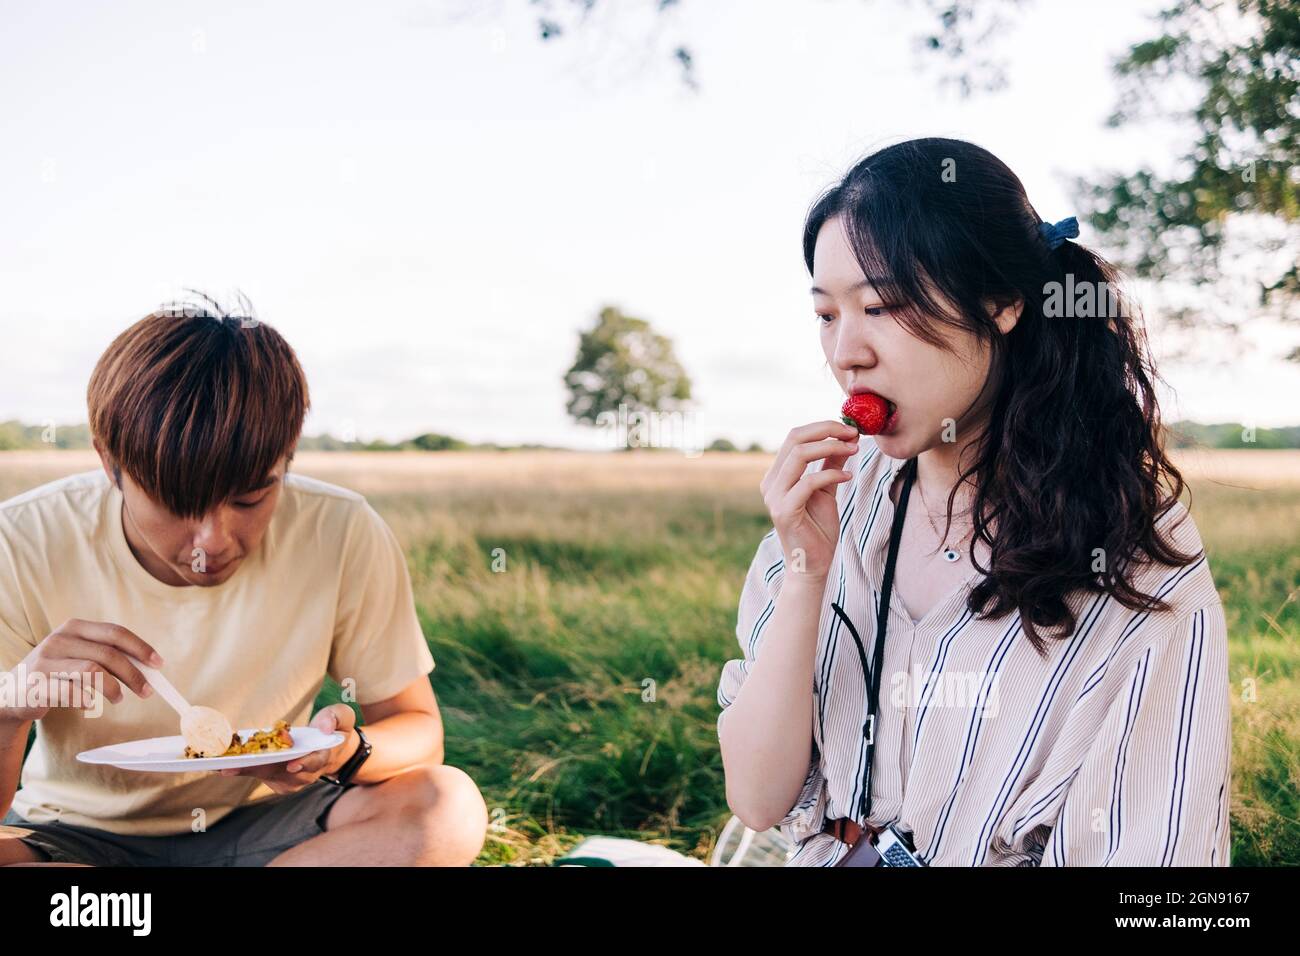 Woman eating strawberry while sitting with man at park during picnic Stock Photo